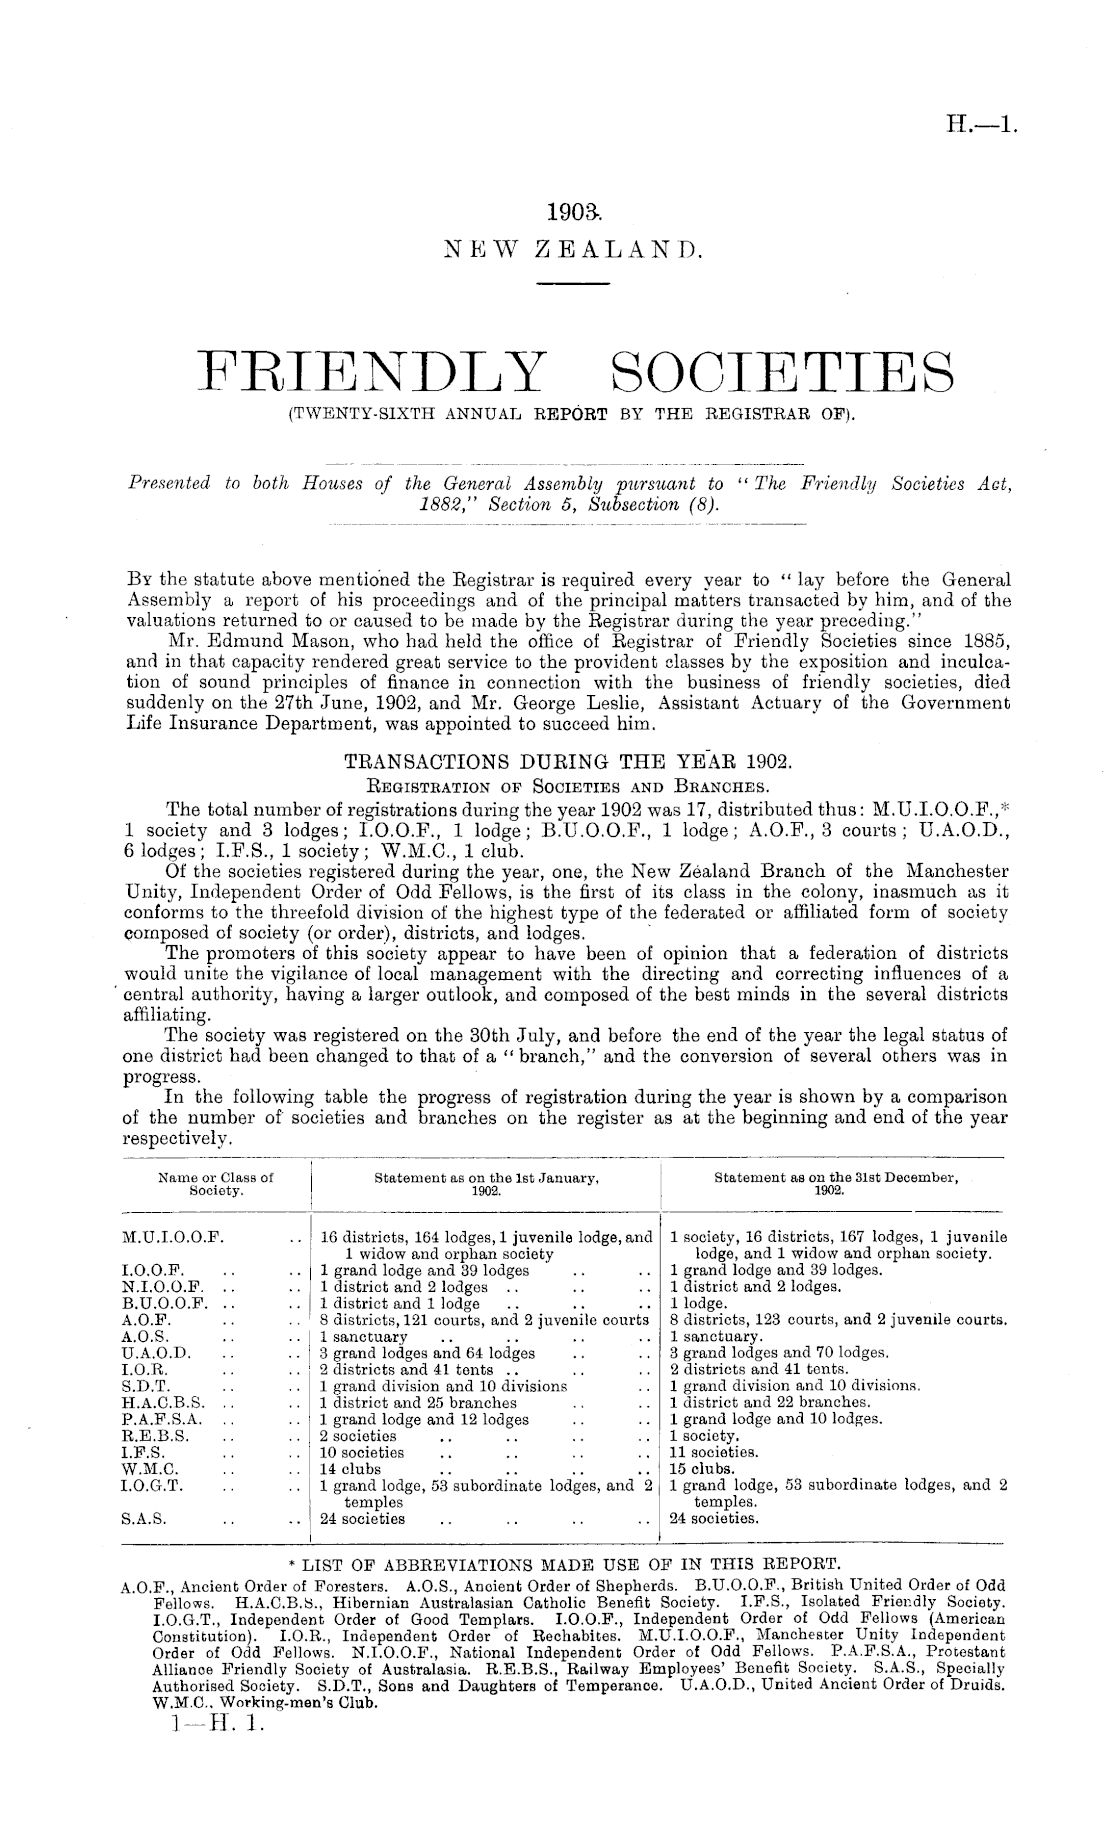 Papers Past Parliamentary Papers Appendix To The Journals Of The House Of Representatives 1903 Session I Page 1